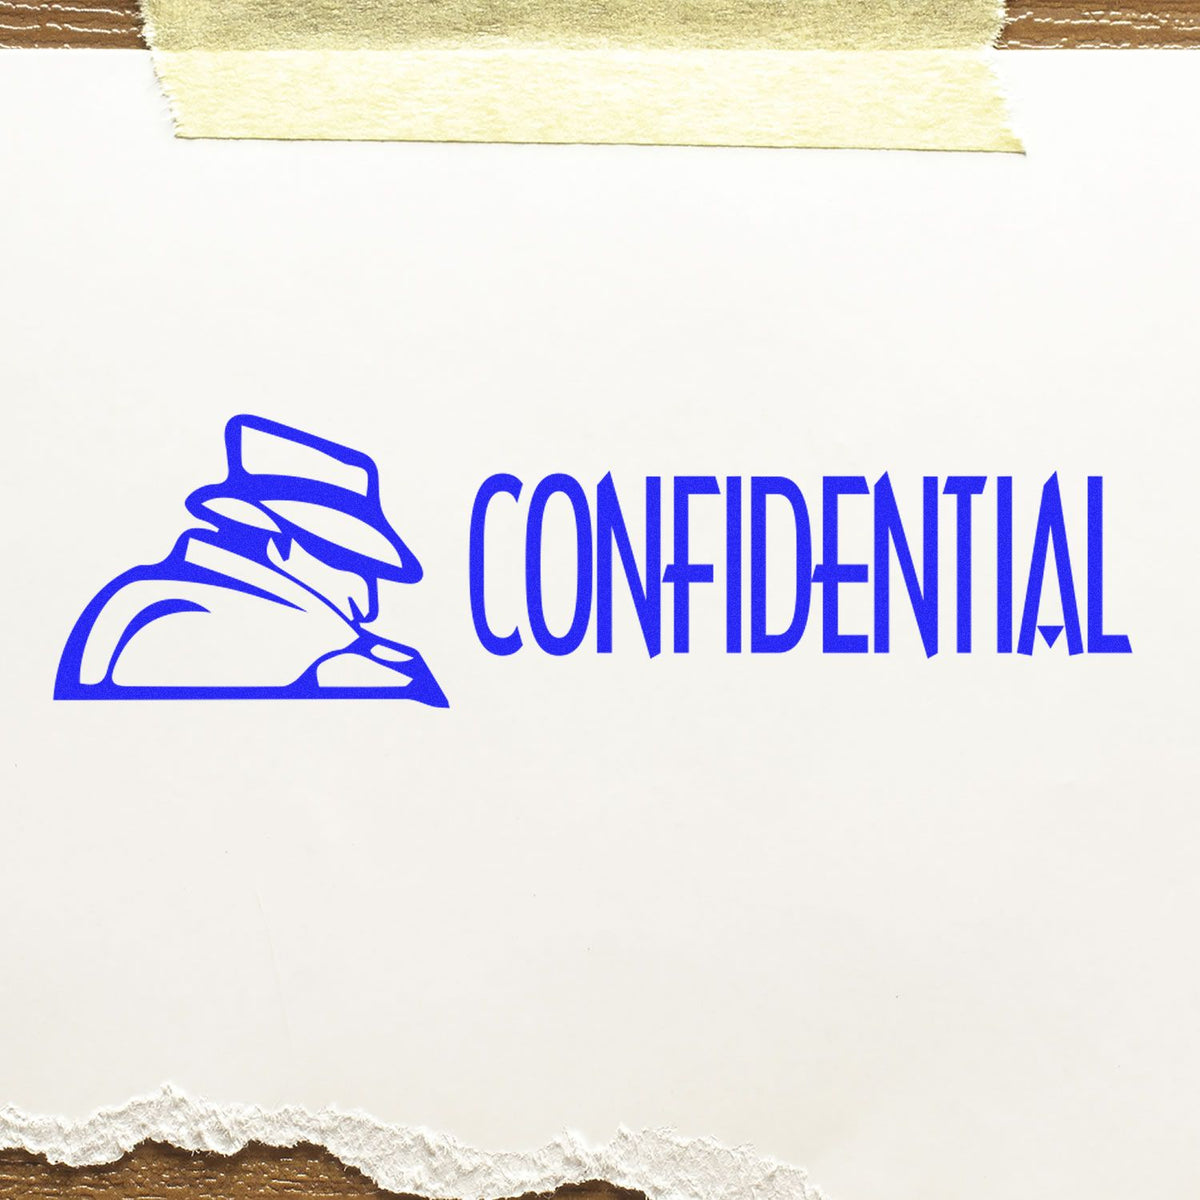 Confidential with Logo Rubber Stamp In Use Photo